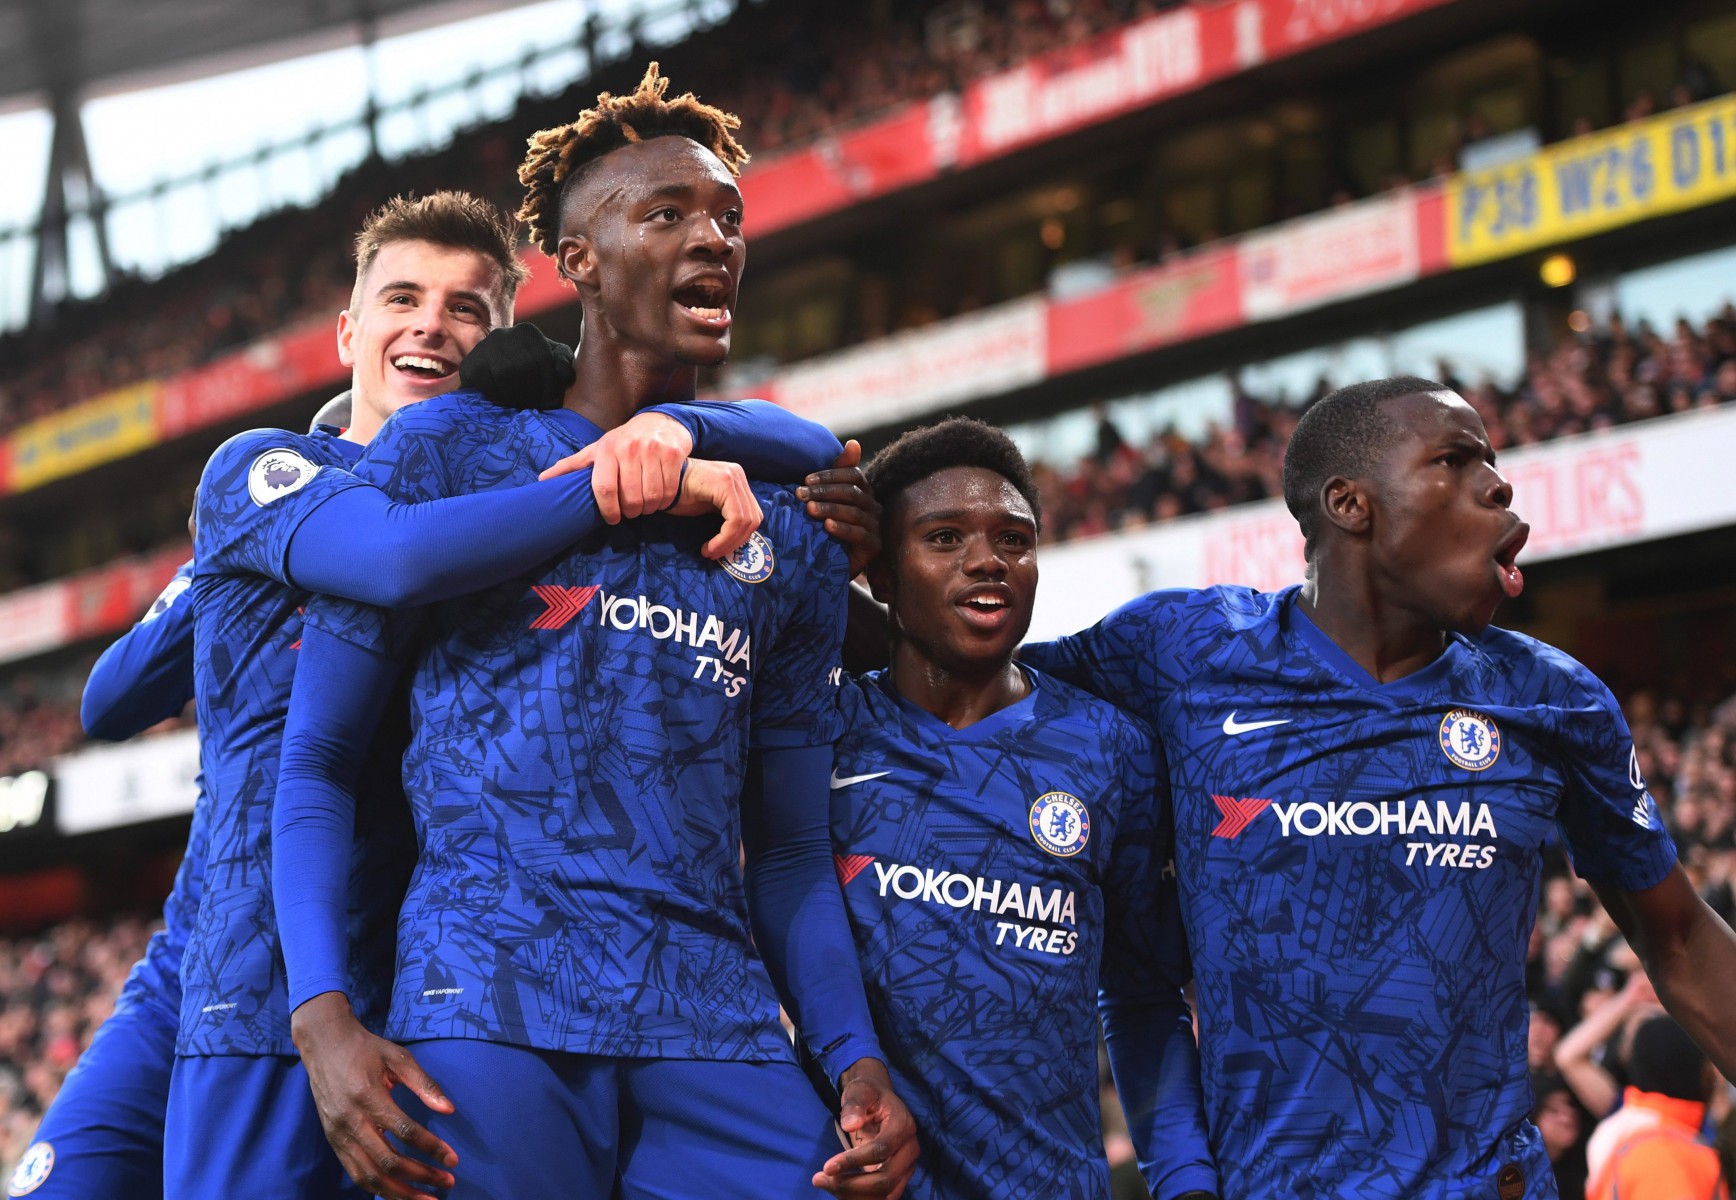 , Chelsea vs Arsenal FREE: Live stream, TV channel, kick off time and team news for Premier League derby